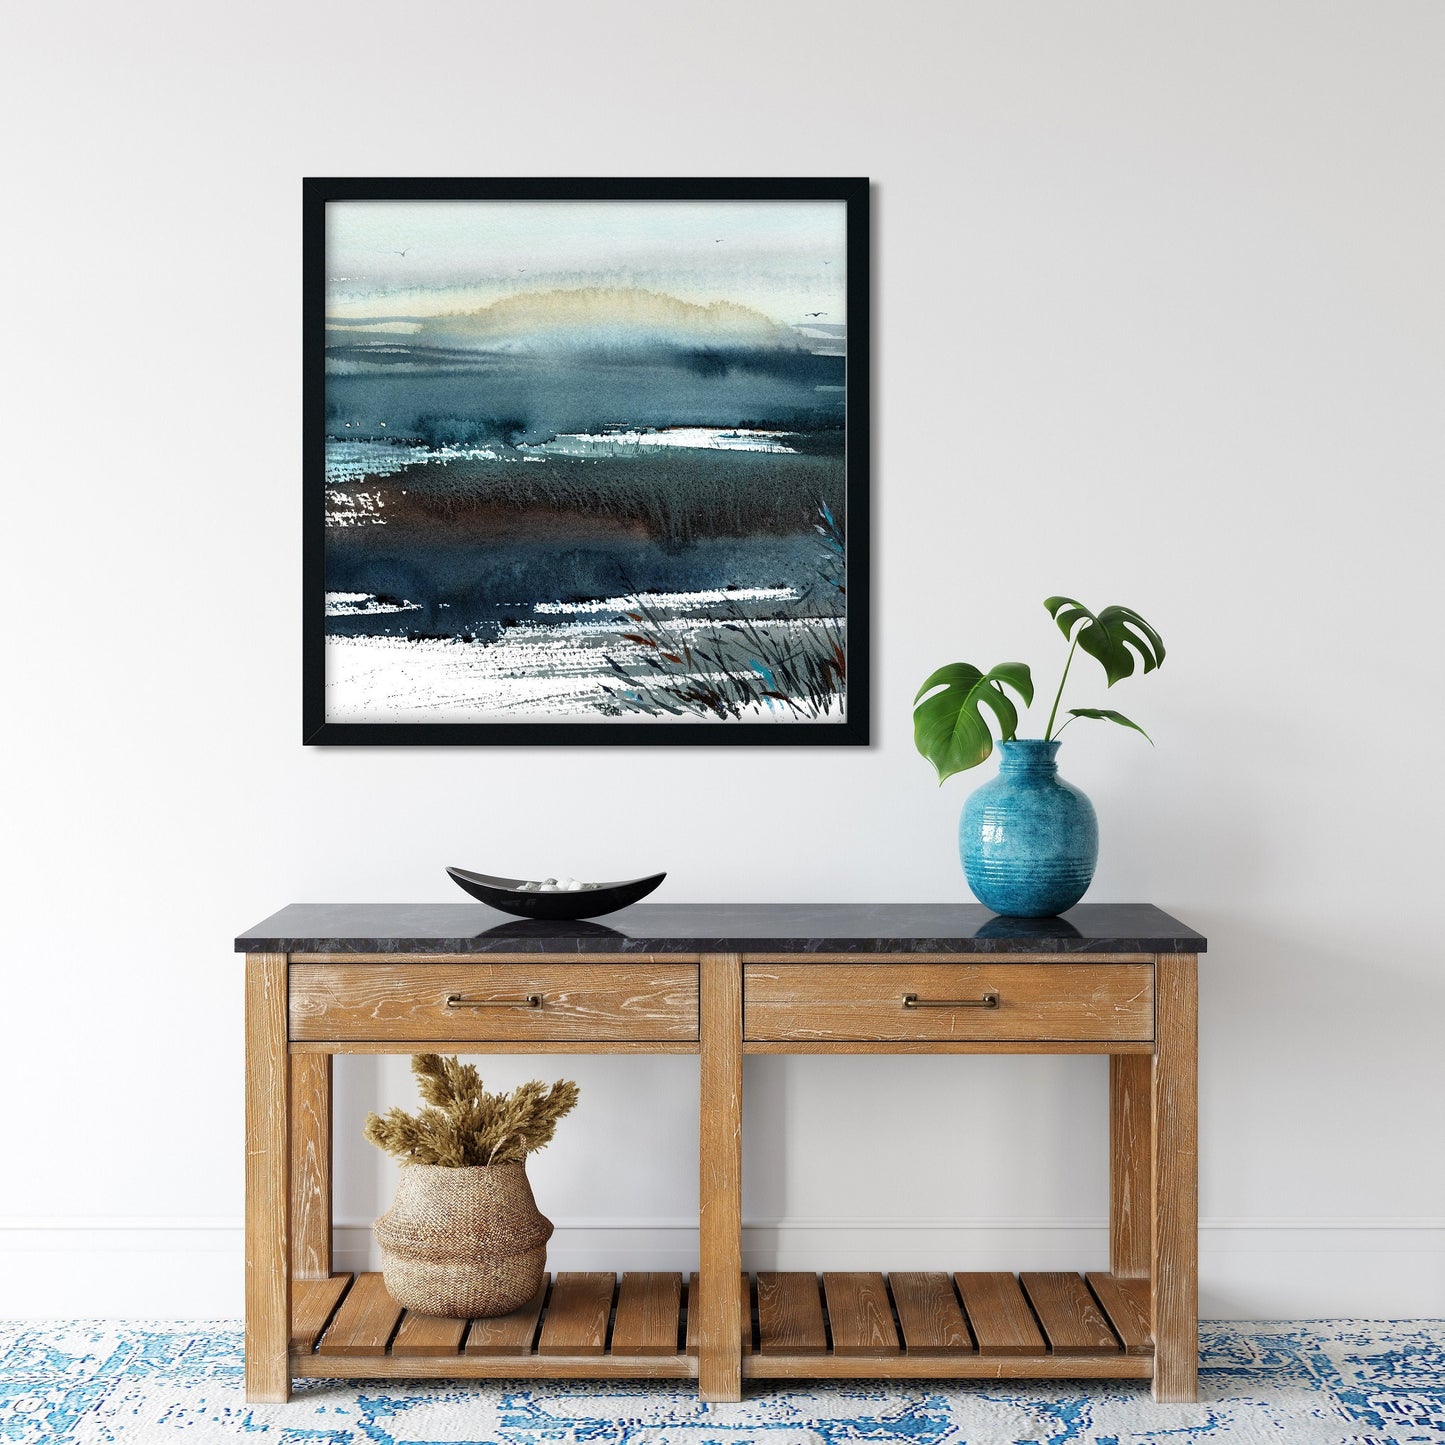 Abstract Landscape Square Painting on Canvas, Watercolor Art Print, Contemporary Wall Art, Navy Blue, Living Room Decor